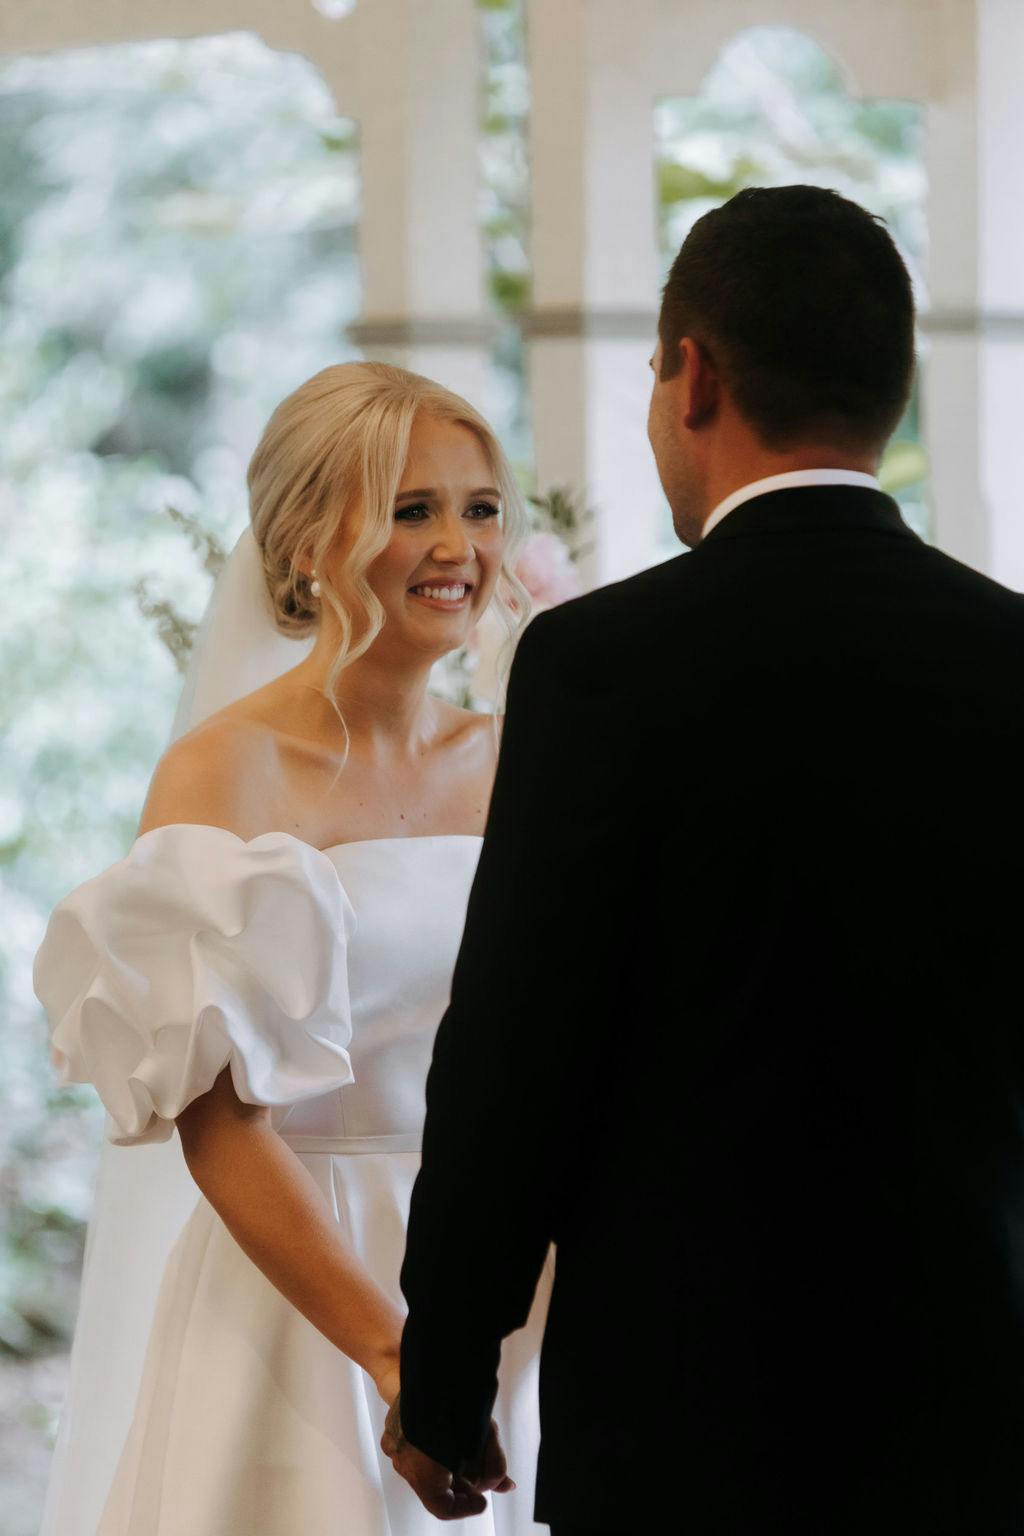 A bride and groom are standing face to face, holding hands. The bride is wearing an off-the-shoulder white wedding dress with puff sleeves, and her hair is styled in loose curls. The groom is in a black suit. They are smiling at each other in an outdoor setting.